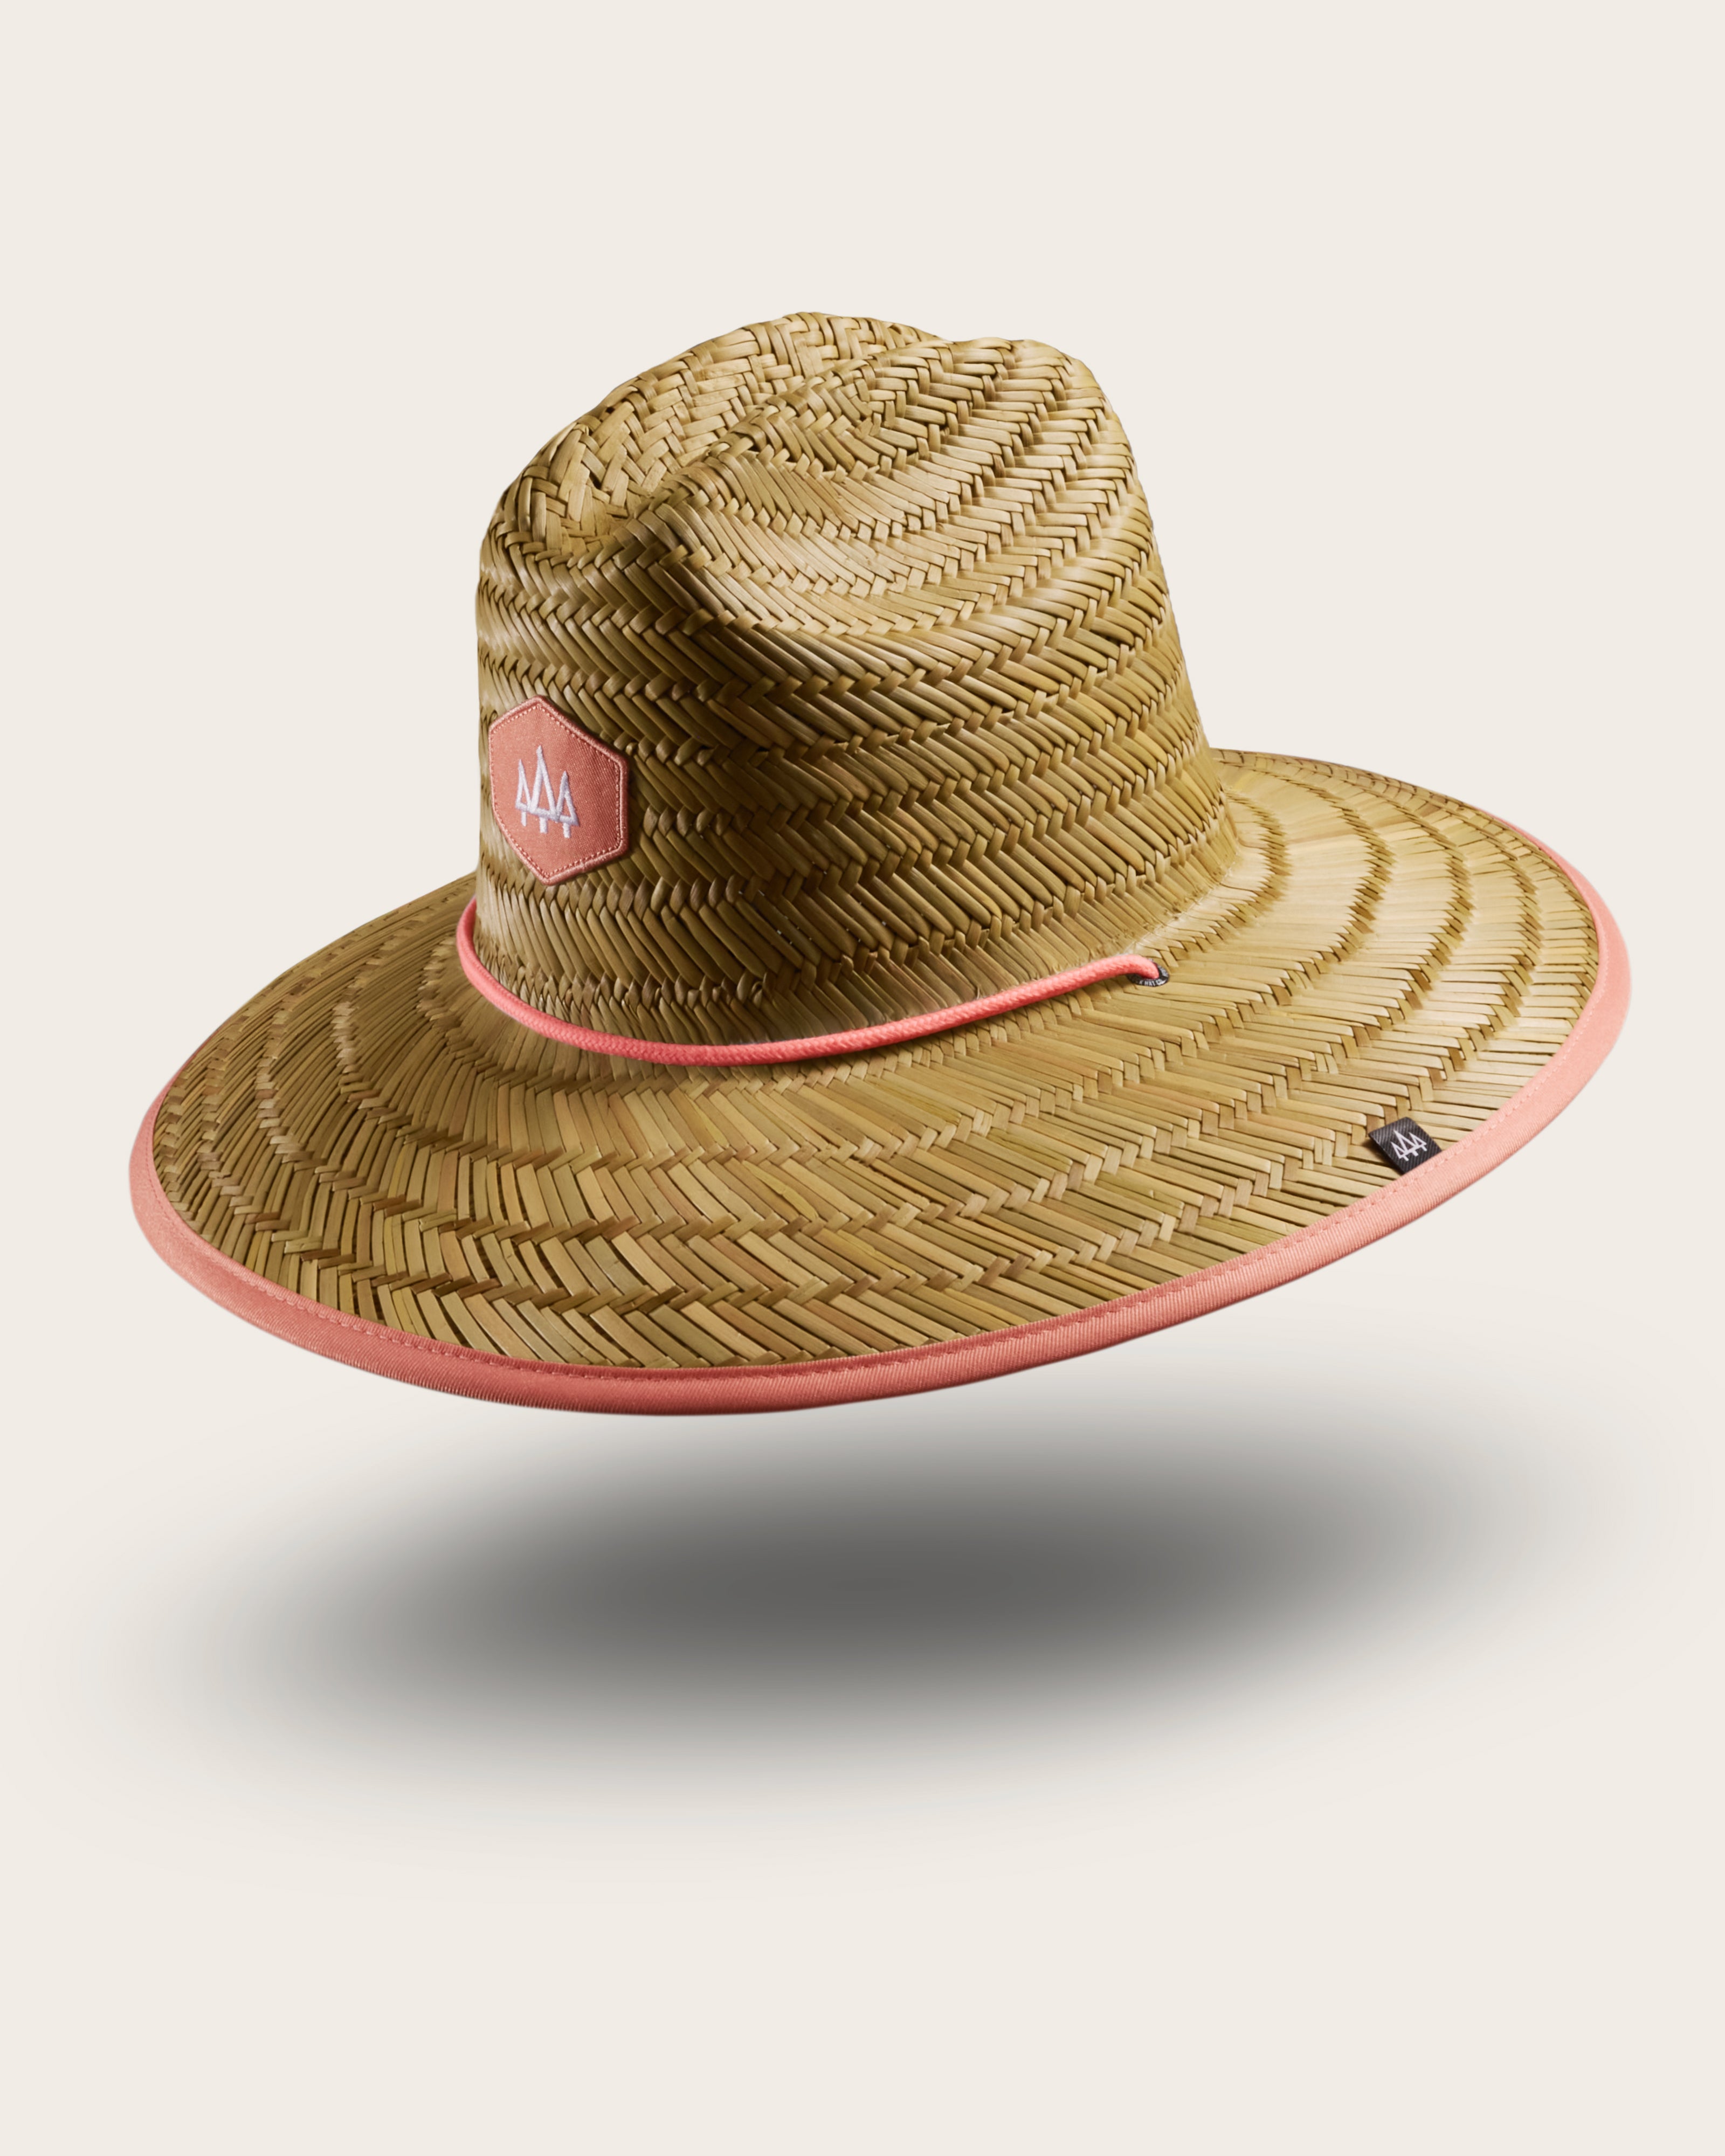 Hemlock Guava straw lifeguard hat with coral color with patch